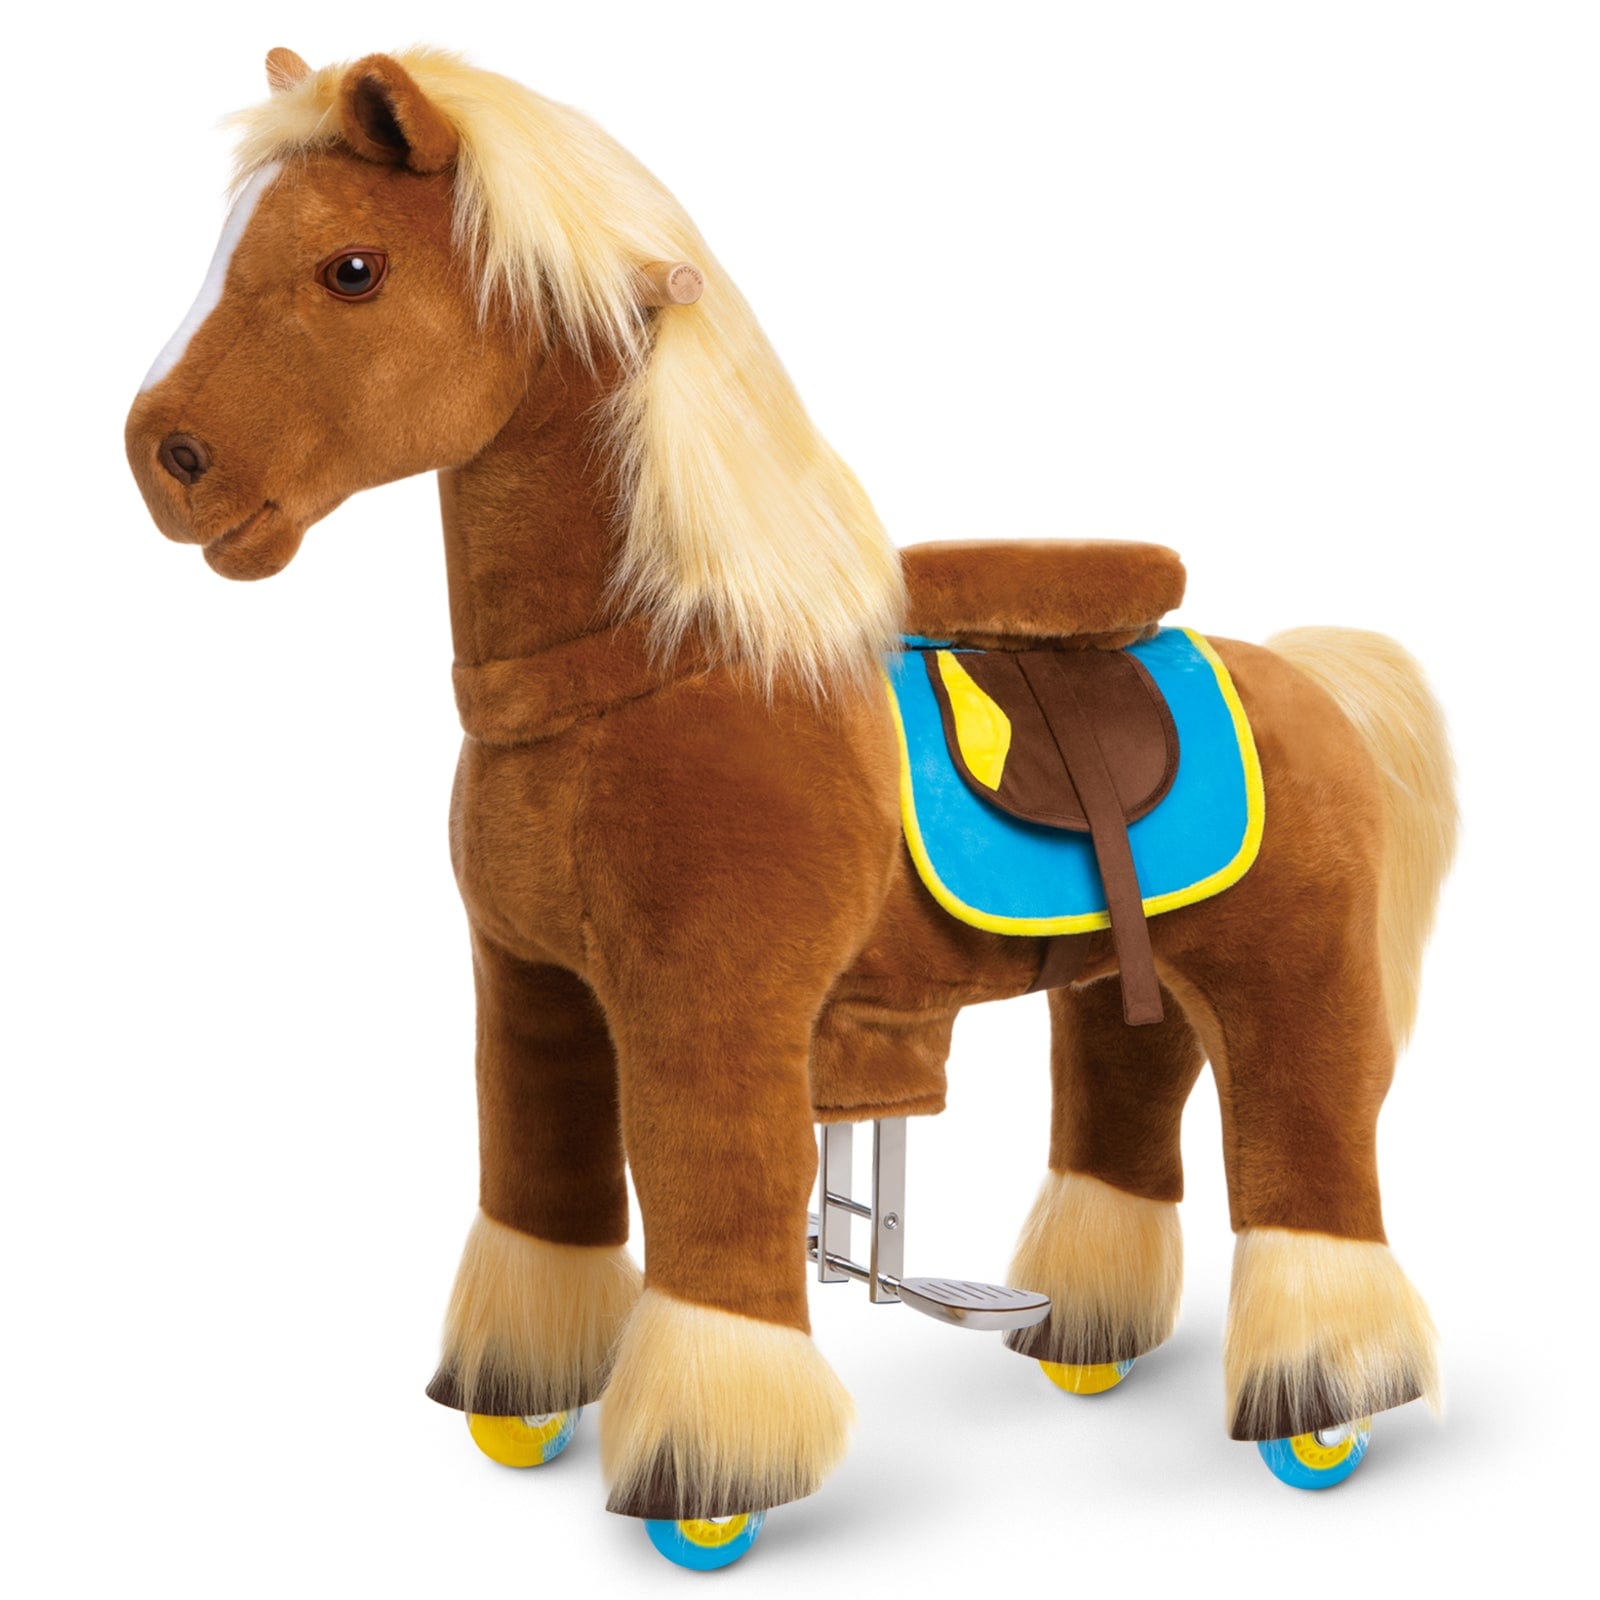 PonyCycle, Inc. Riding Horse Toy for Age 3-5 Brown Model X